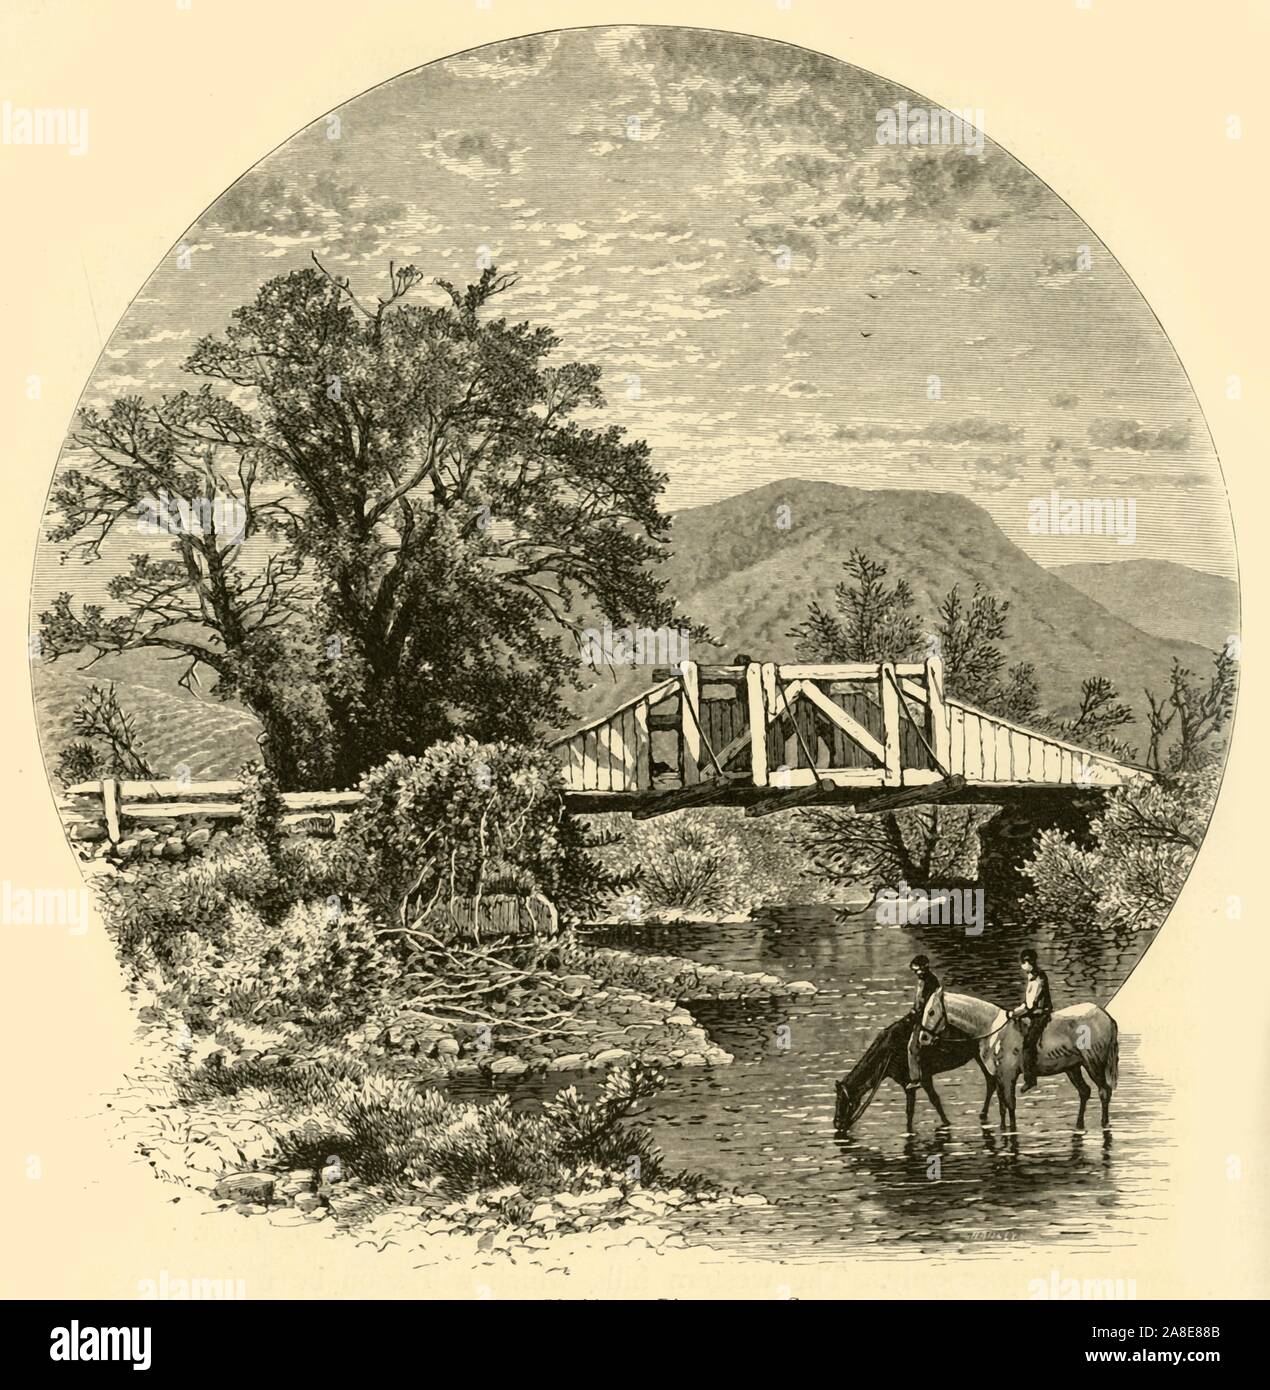 'Old Bridge, Blackberry River, near Canaan', 1874. Wooden bridge in Connecticut, USA. From &quot;Picturesque America; or, The Land We Live In, A Delineation by Pen and Pencil of the Mountains, Rivers, Lakes...with Illustrations on Steel and Wood by Eminent American Artists&quot; Vol. II, edited by William Cullen Bryant. [D. Appleton and Company, New York, 1874] Stock Photo